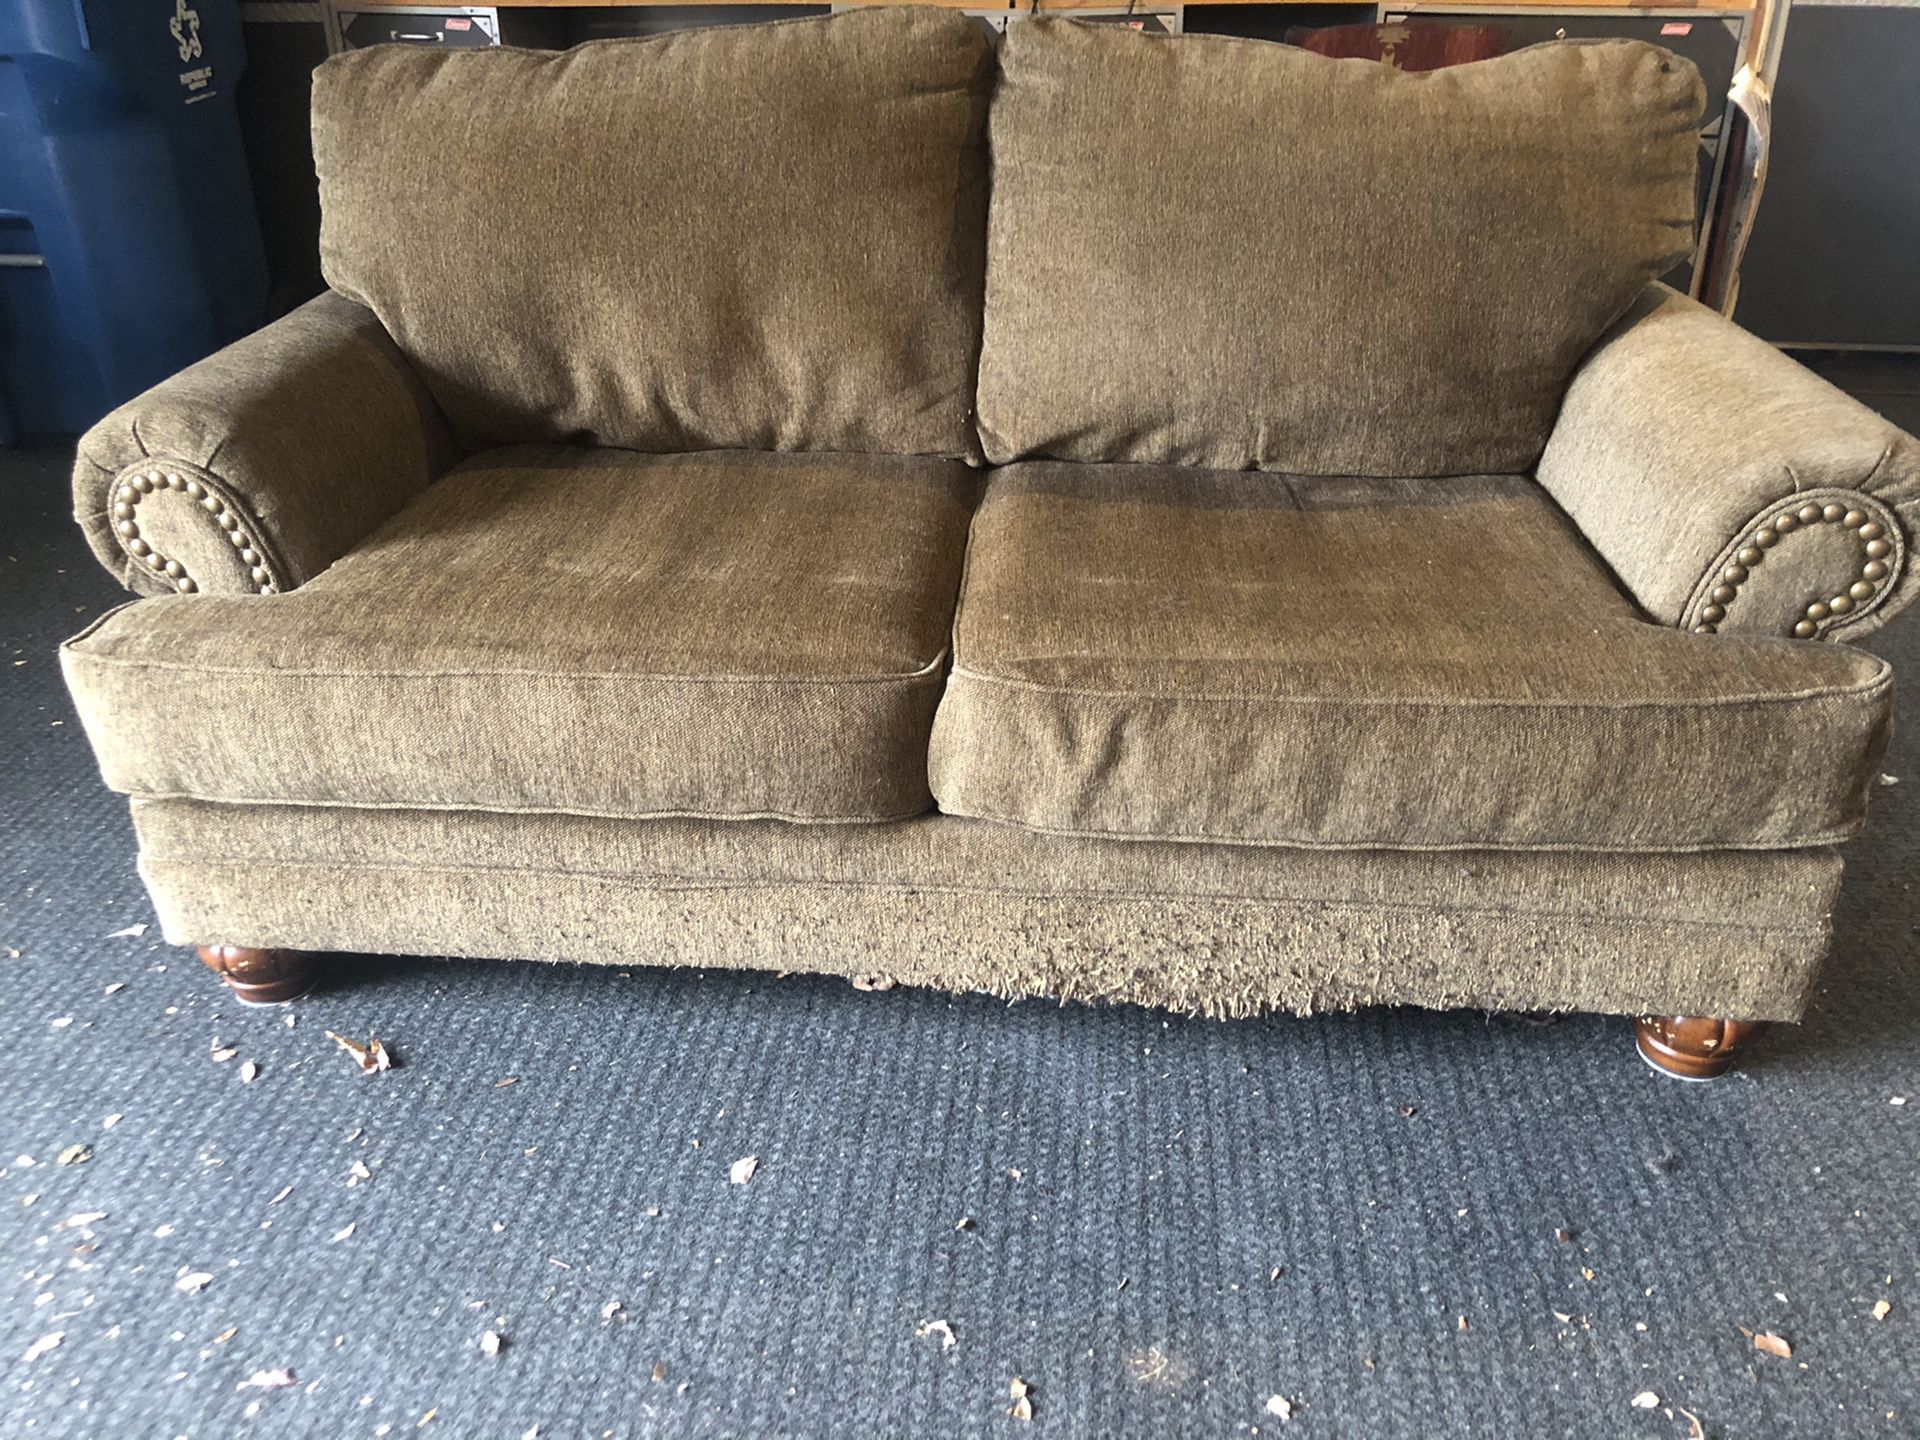 FREE love seat couch